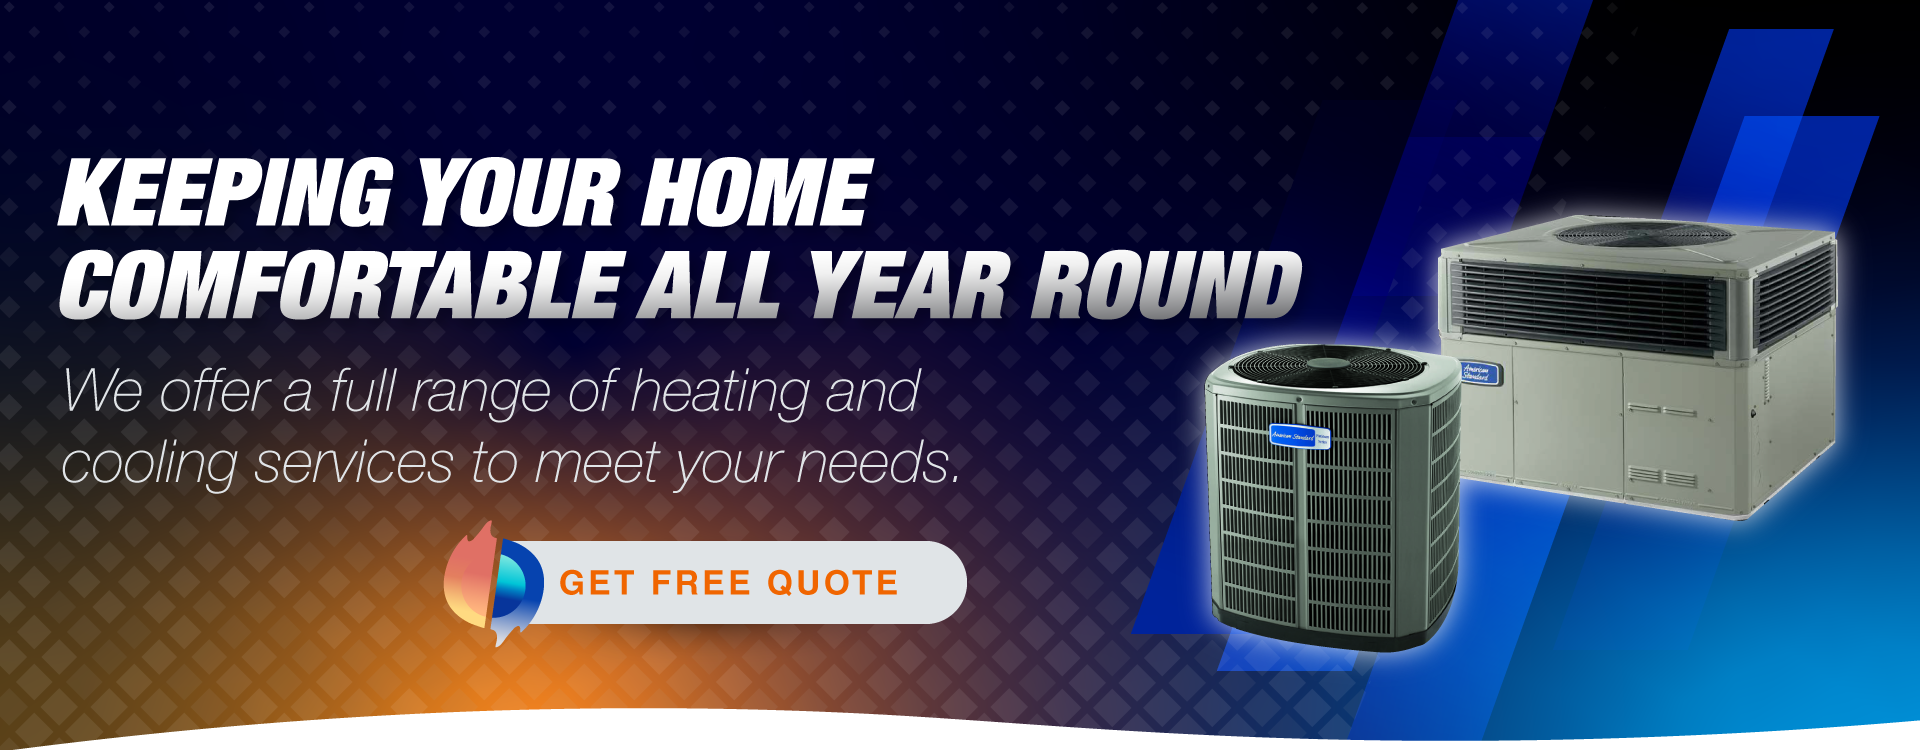 heating and cooling services to meet your needs in mcfarland and surroundings